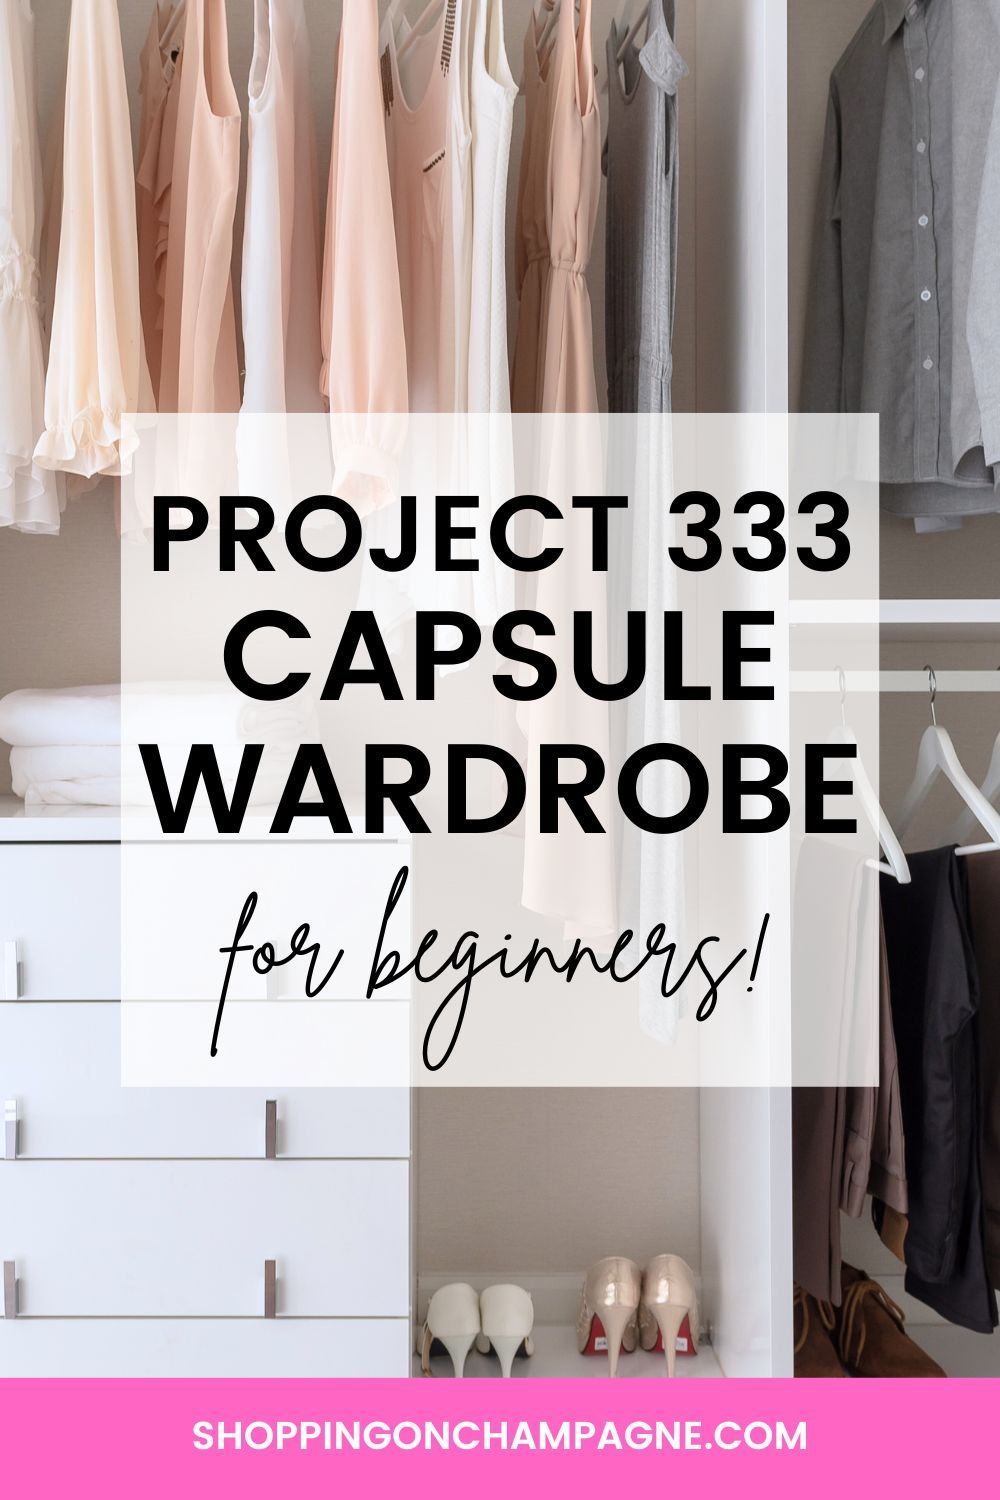 How to Build a Project 333 Capsule Wardrobe — Shopping on Champagne, Nancy  Queen